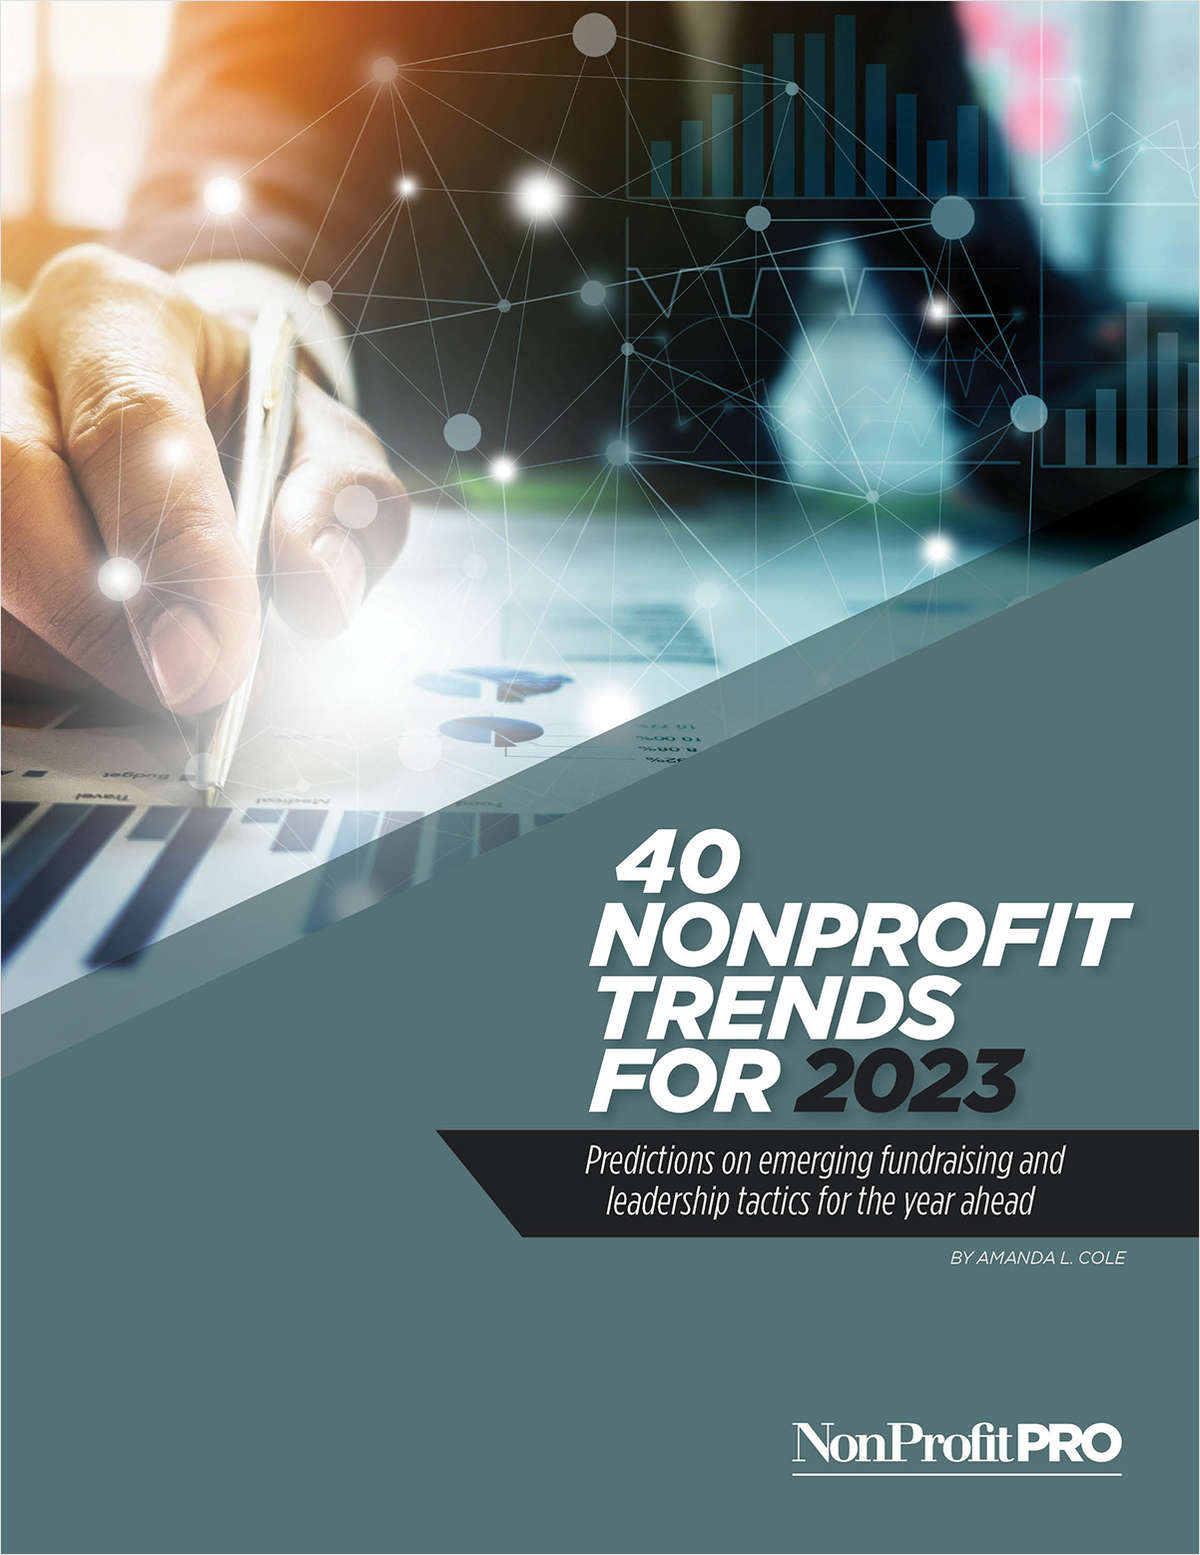 40 Nonprofit Trends for 2023